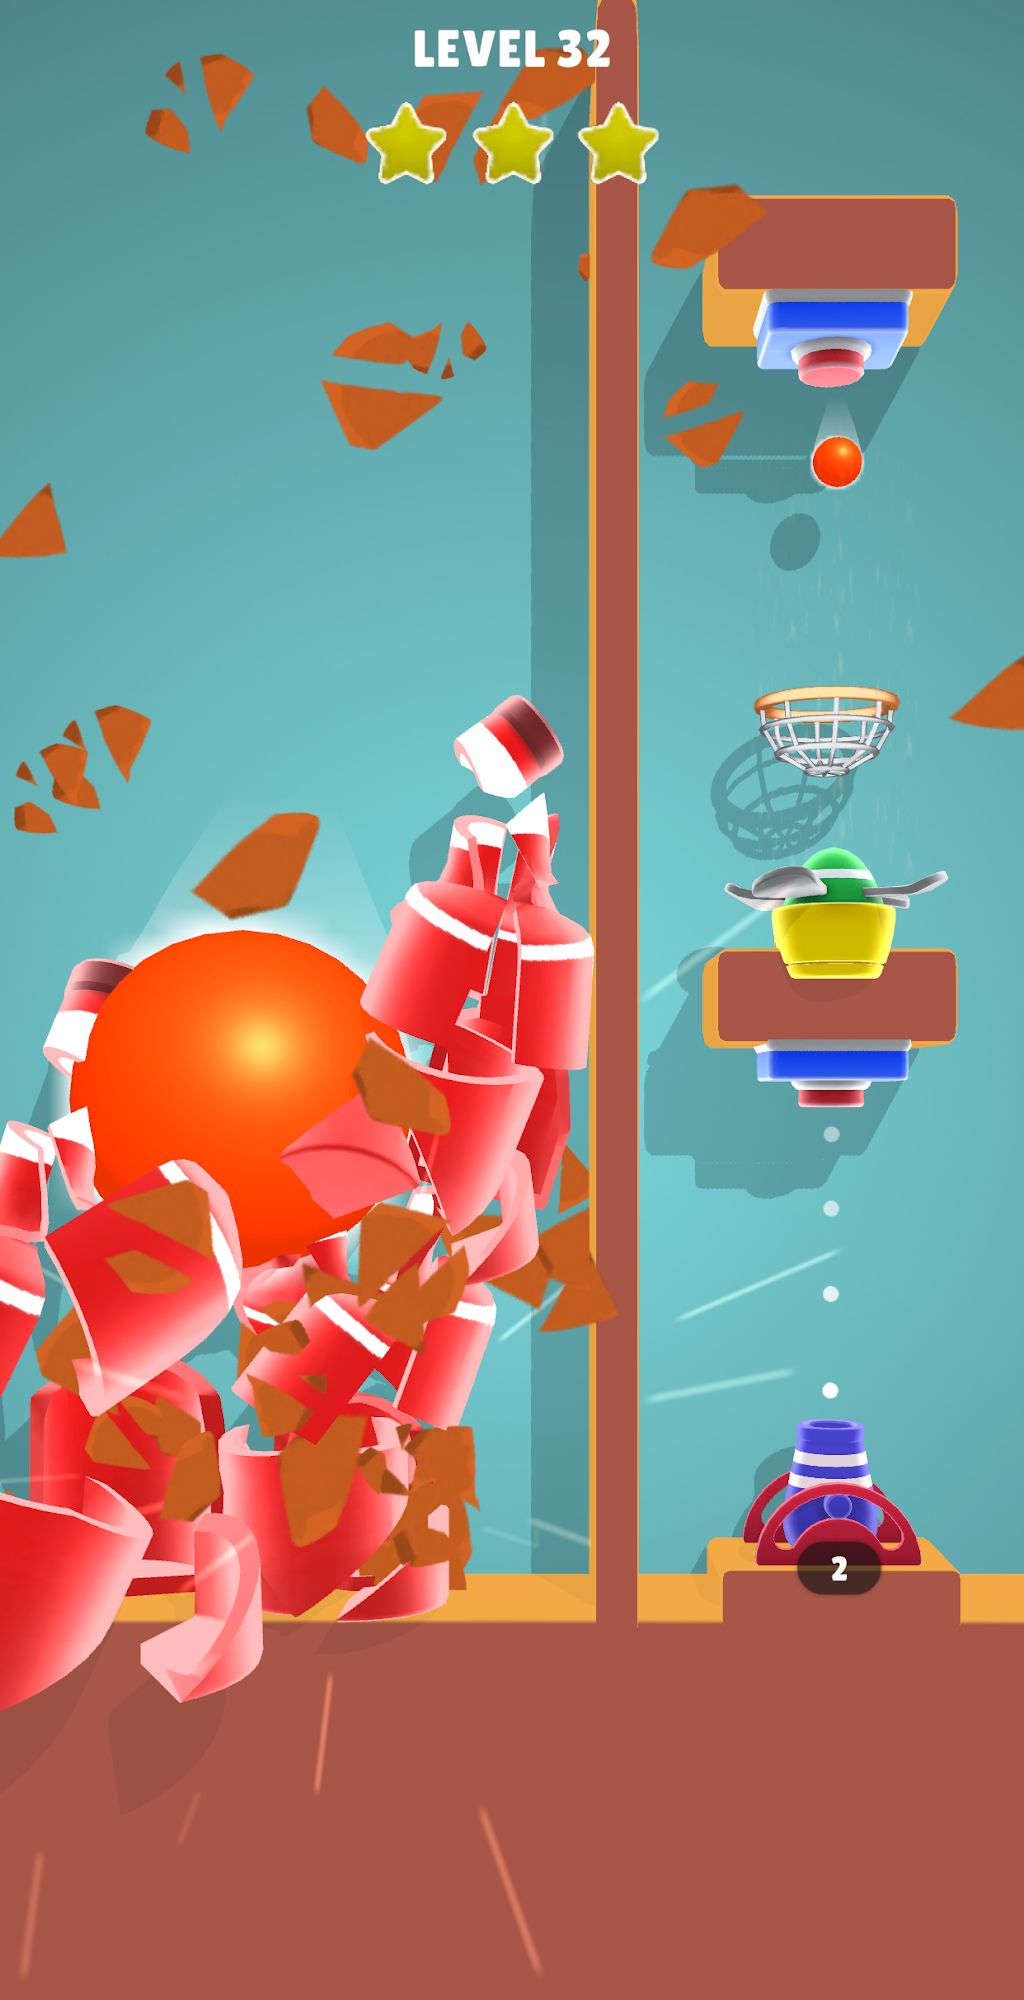 Download game Bottle Smash! for Android free | 9LifeHack.com